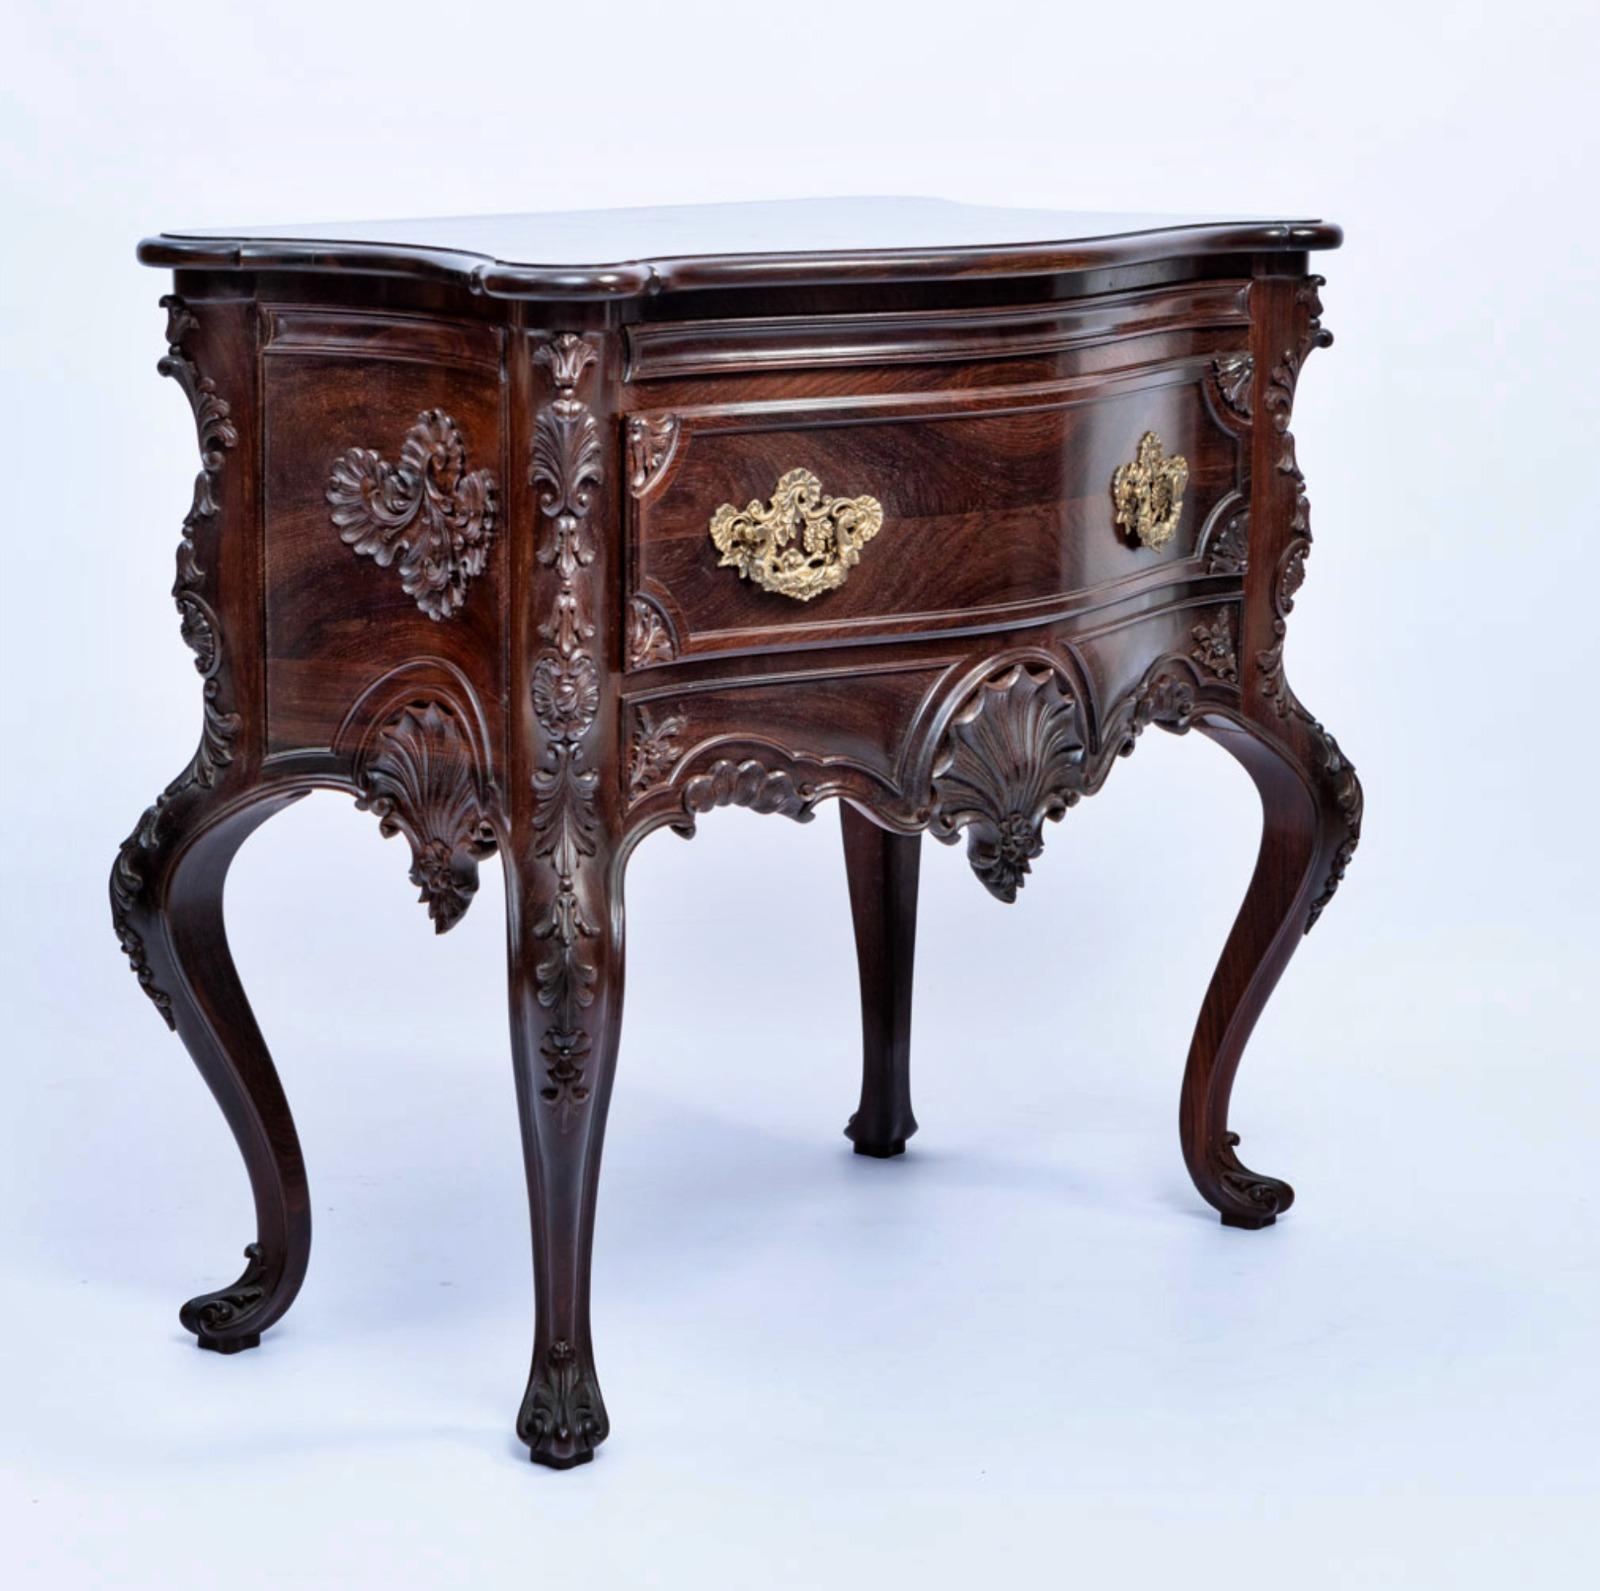 Portuguese half chest of drawers
End 19th Century
in rosewood with carvings, scalloped skirts, embossed yellow metal handles.
DIM.: 83 x 94 x 52 cm
Very good condition.